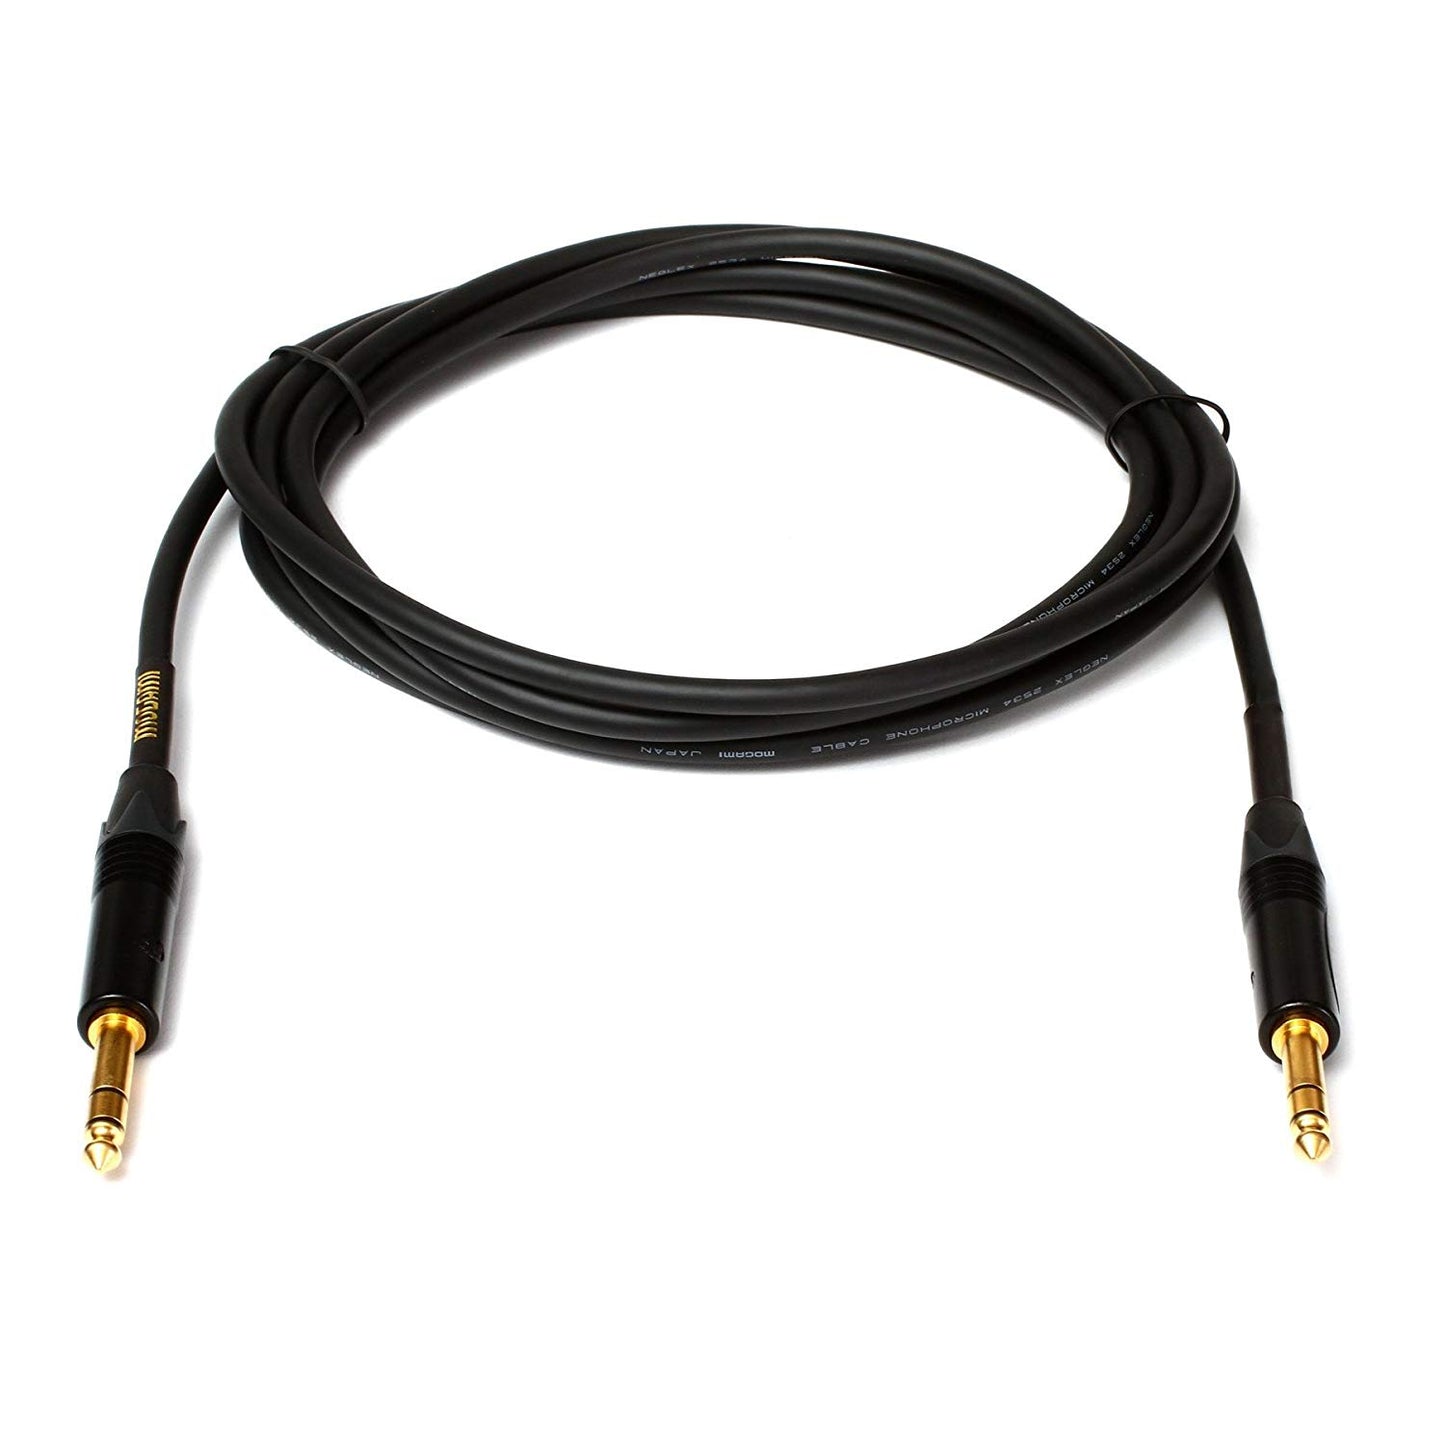 Mogami Gold 1/4"" Phone Male TRS to 1/4"" Phone Male TRS Stereo Cable - 15'